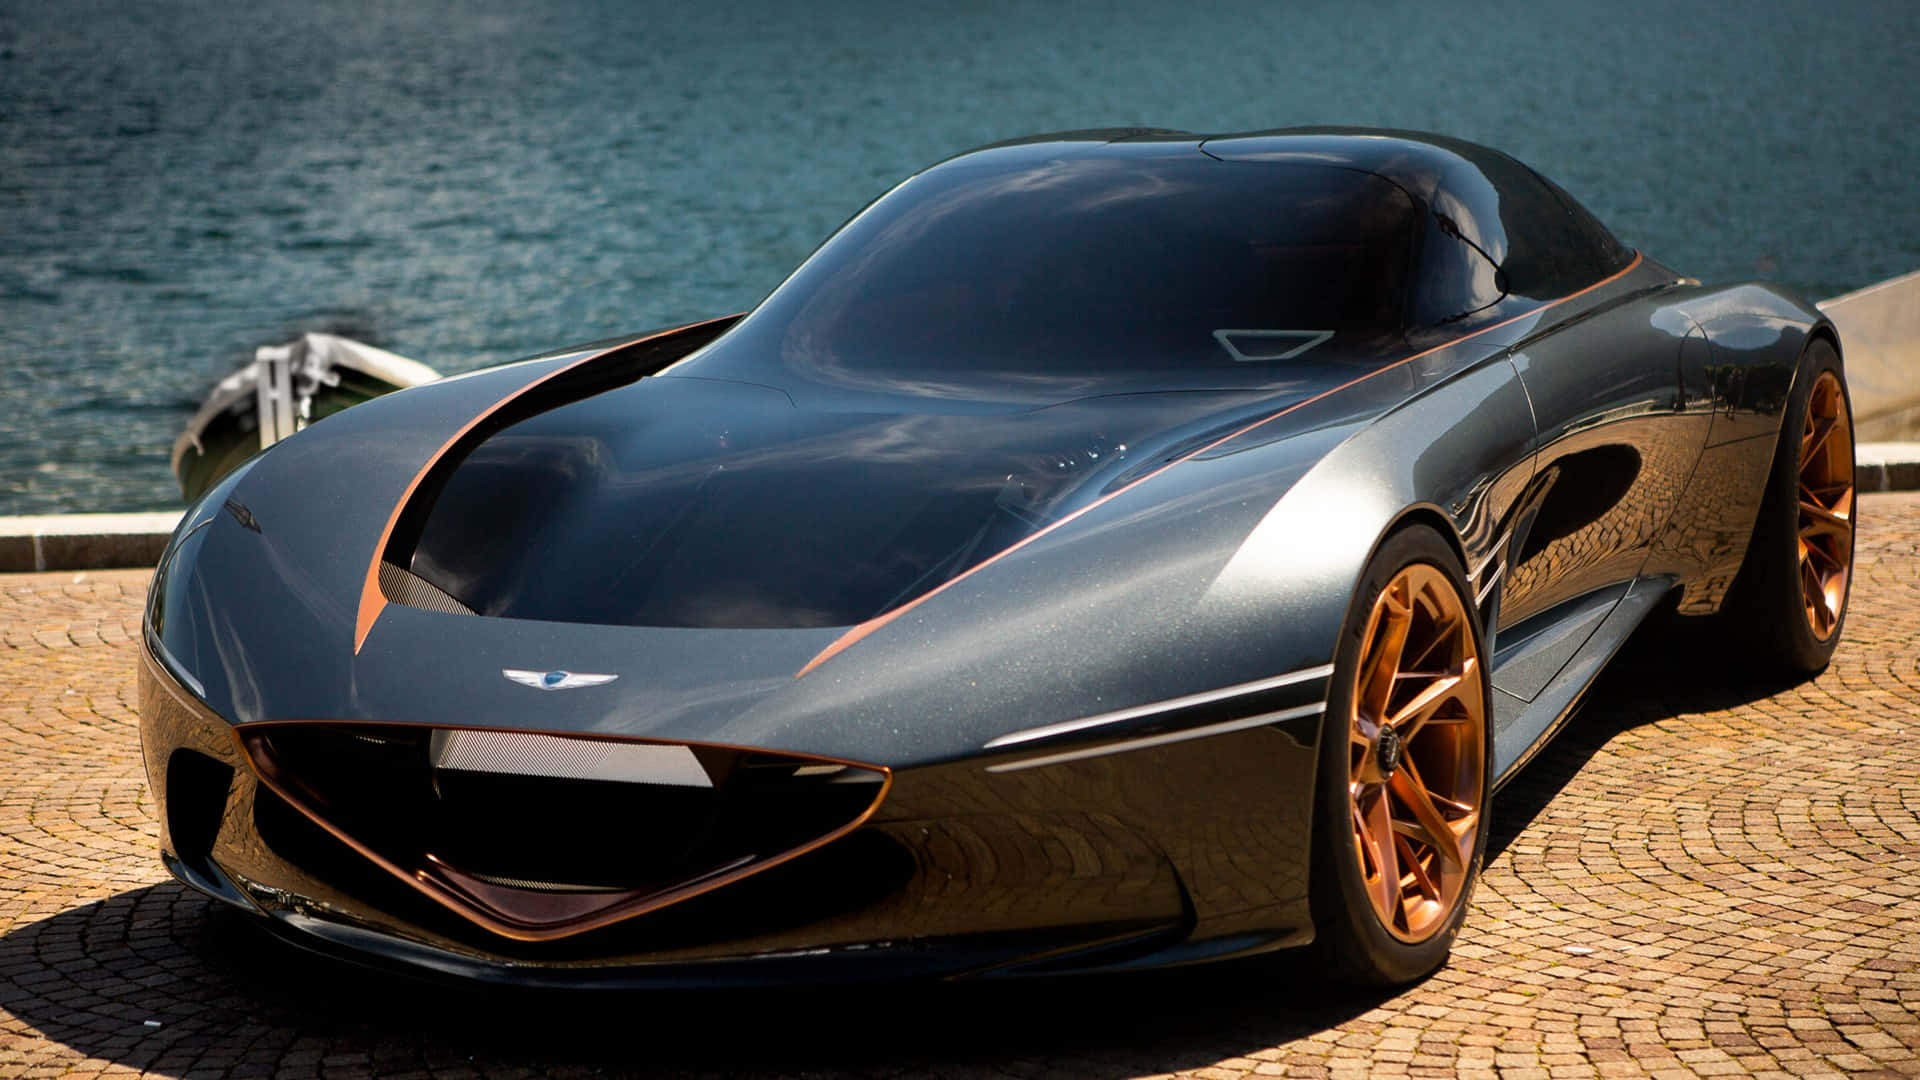 A Black And Gold Sports Car Parked In Front Of A Body Of Water